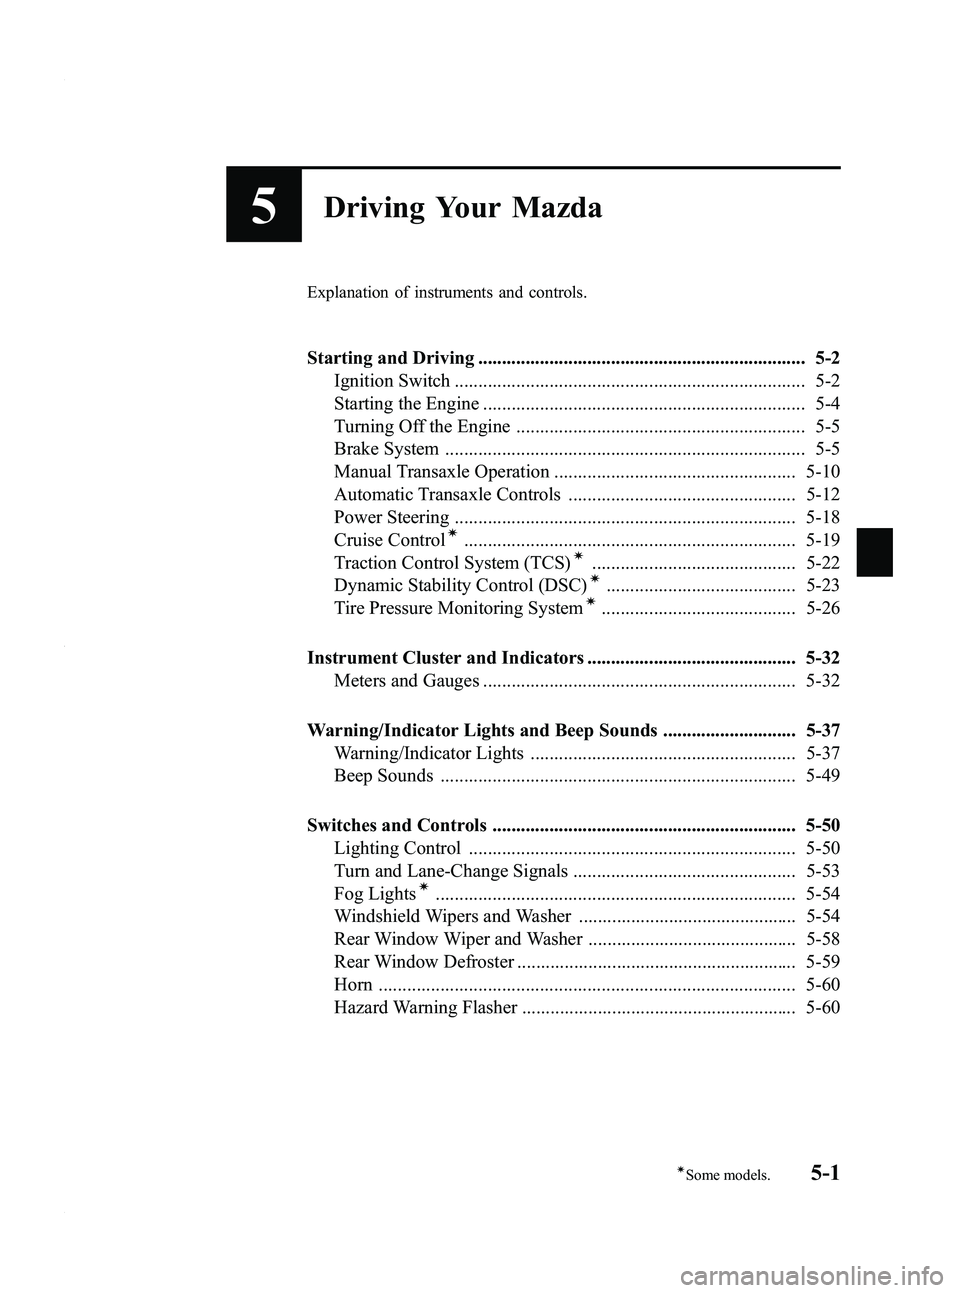 MAZDA MODEL 5 2010  Owners Manual Black plate (109,1)
5Driving Your Mazda
Explanation of instruments and controls.
Starting and Driving ..................................................................... 5-2Ignition Switch .........